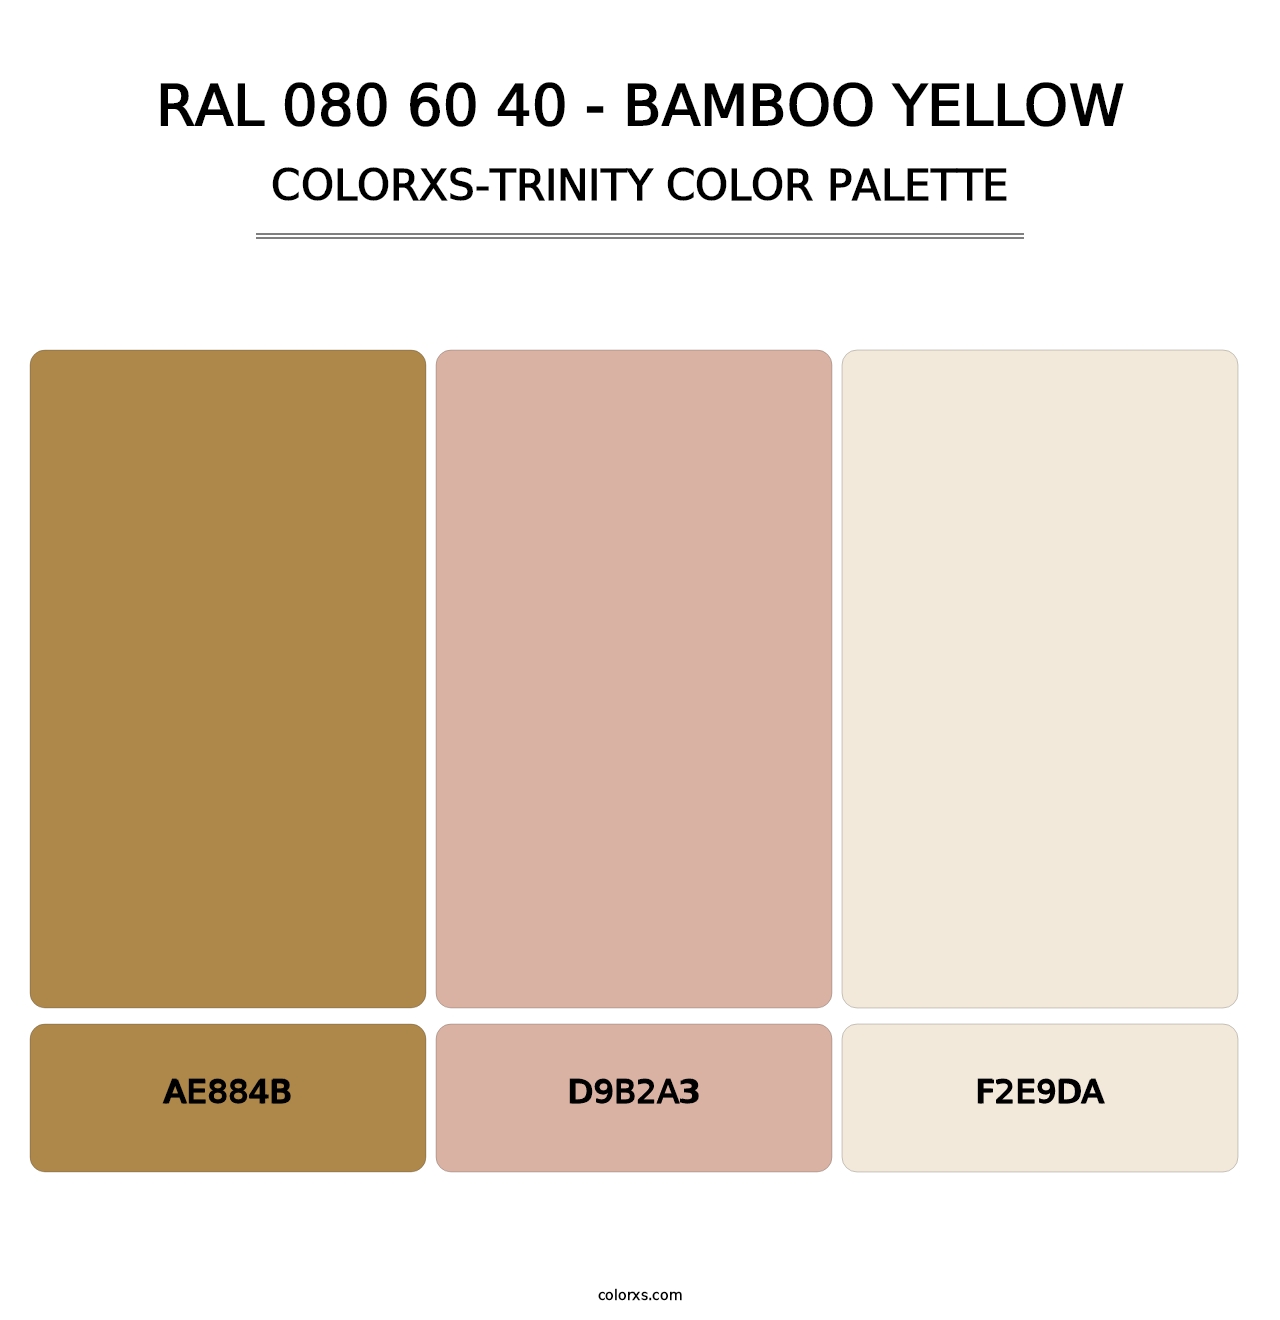 RAL 080 60 40 - Bamboo Yellow - Colorxs Trinity Palette